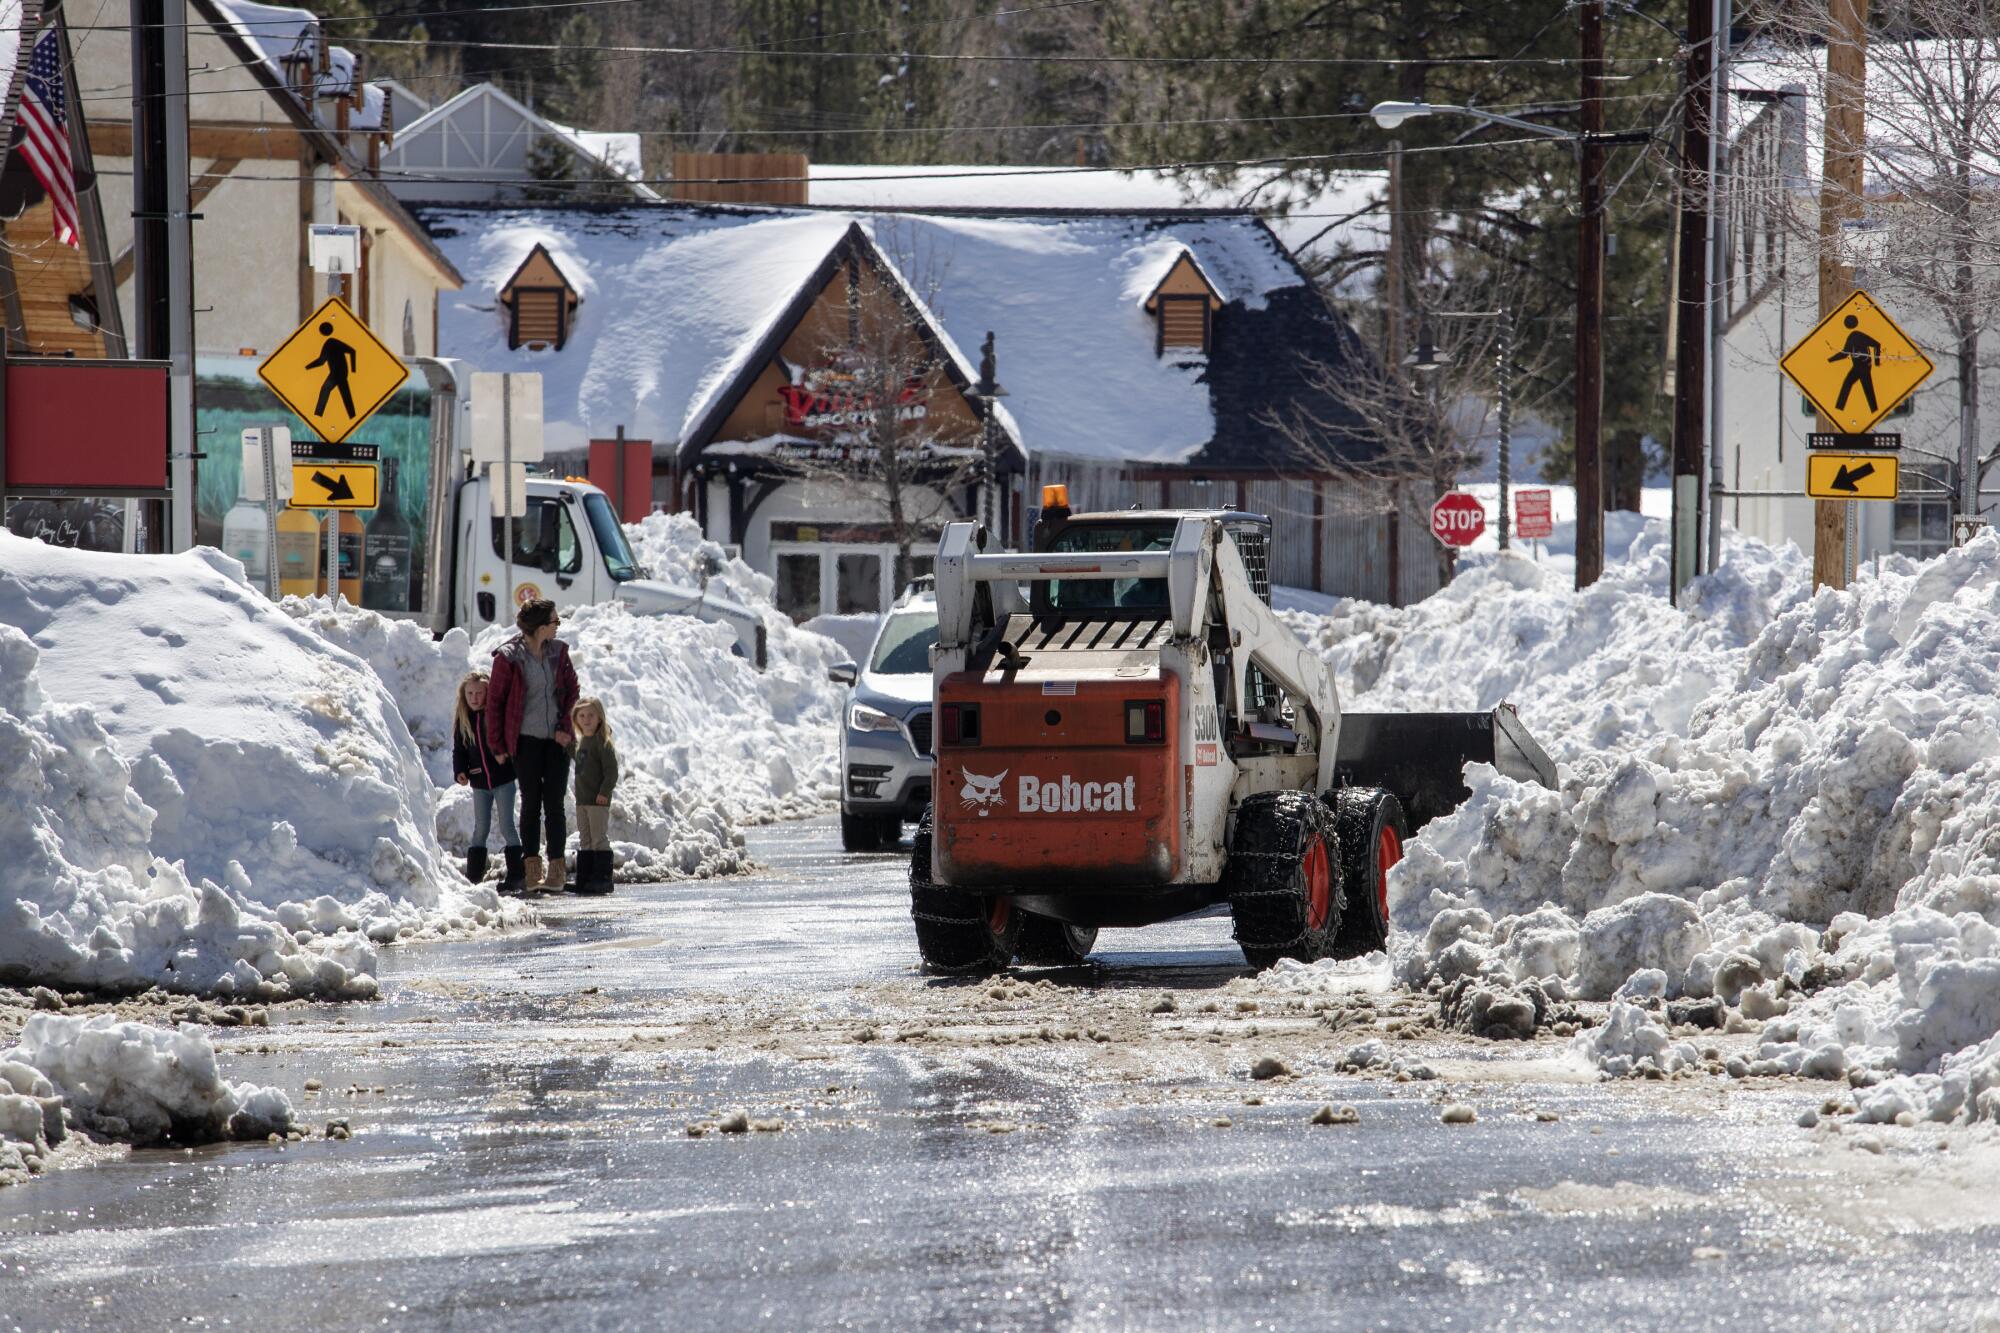 Big Bear Lake streets are plowed while the area is still choked with snow on Friday.